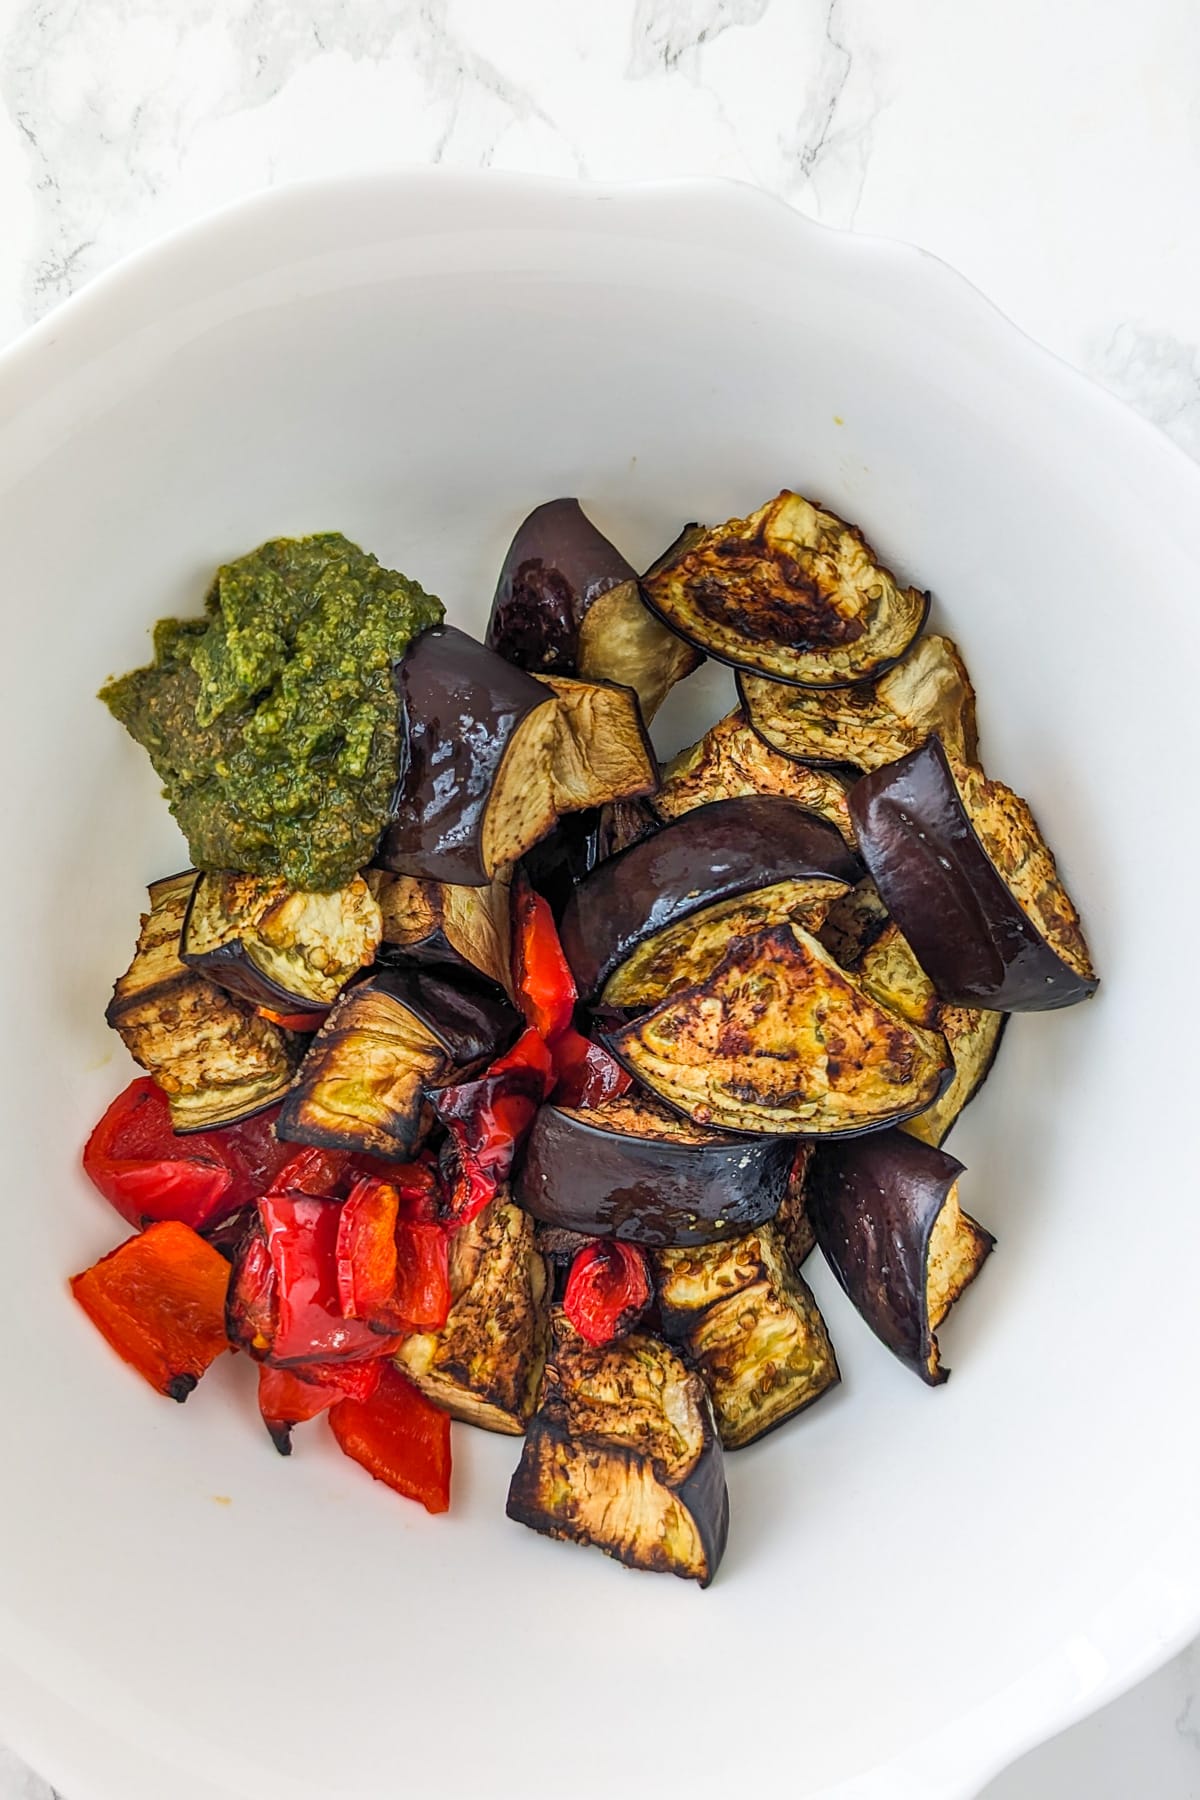 Top view of a white deep bowl with roasted eggplants, bell peppers and pesto sauce.